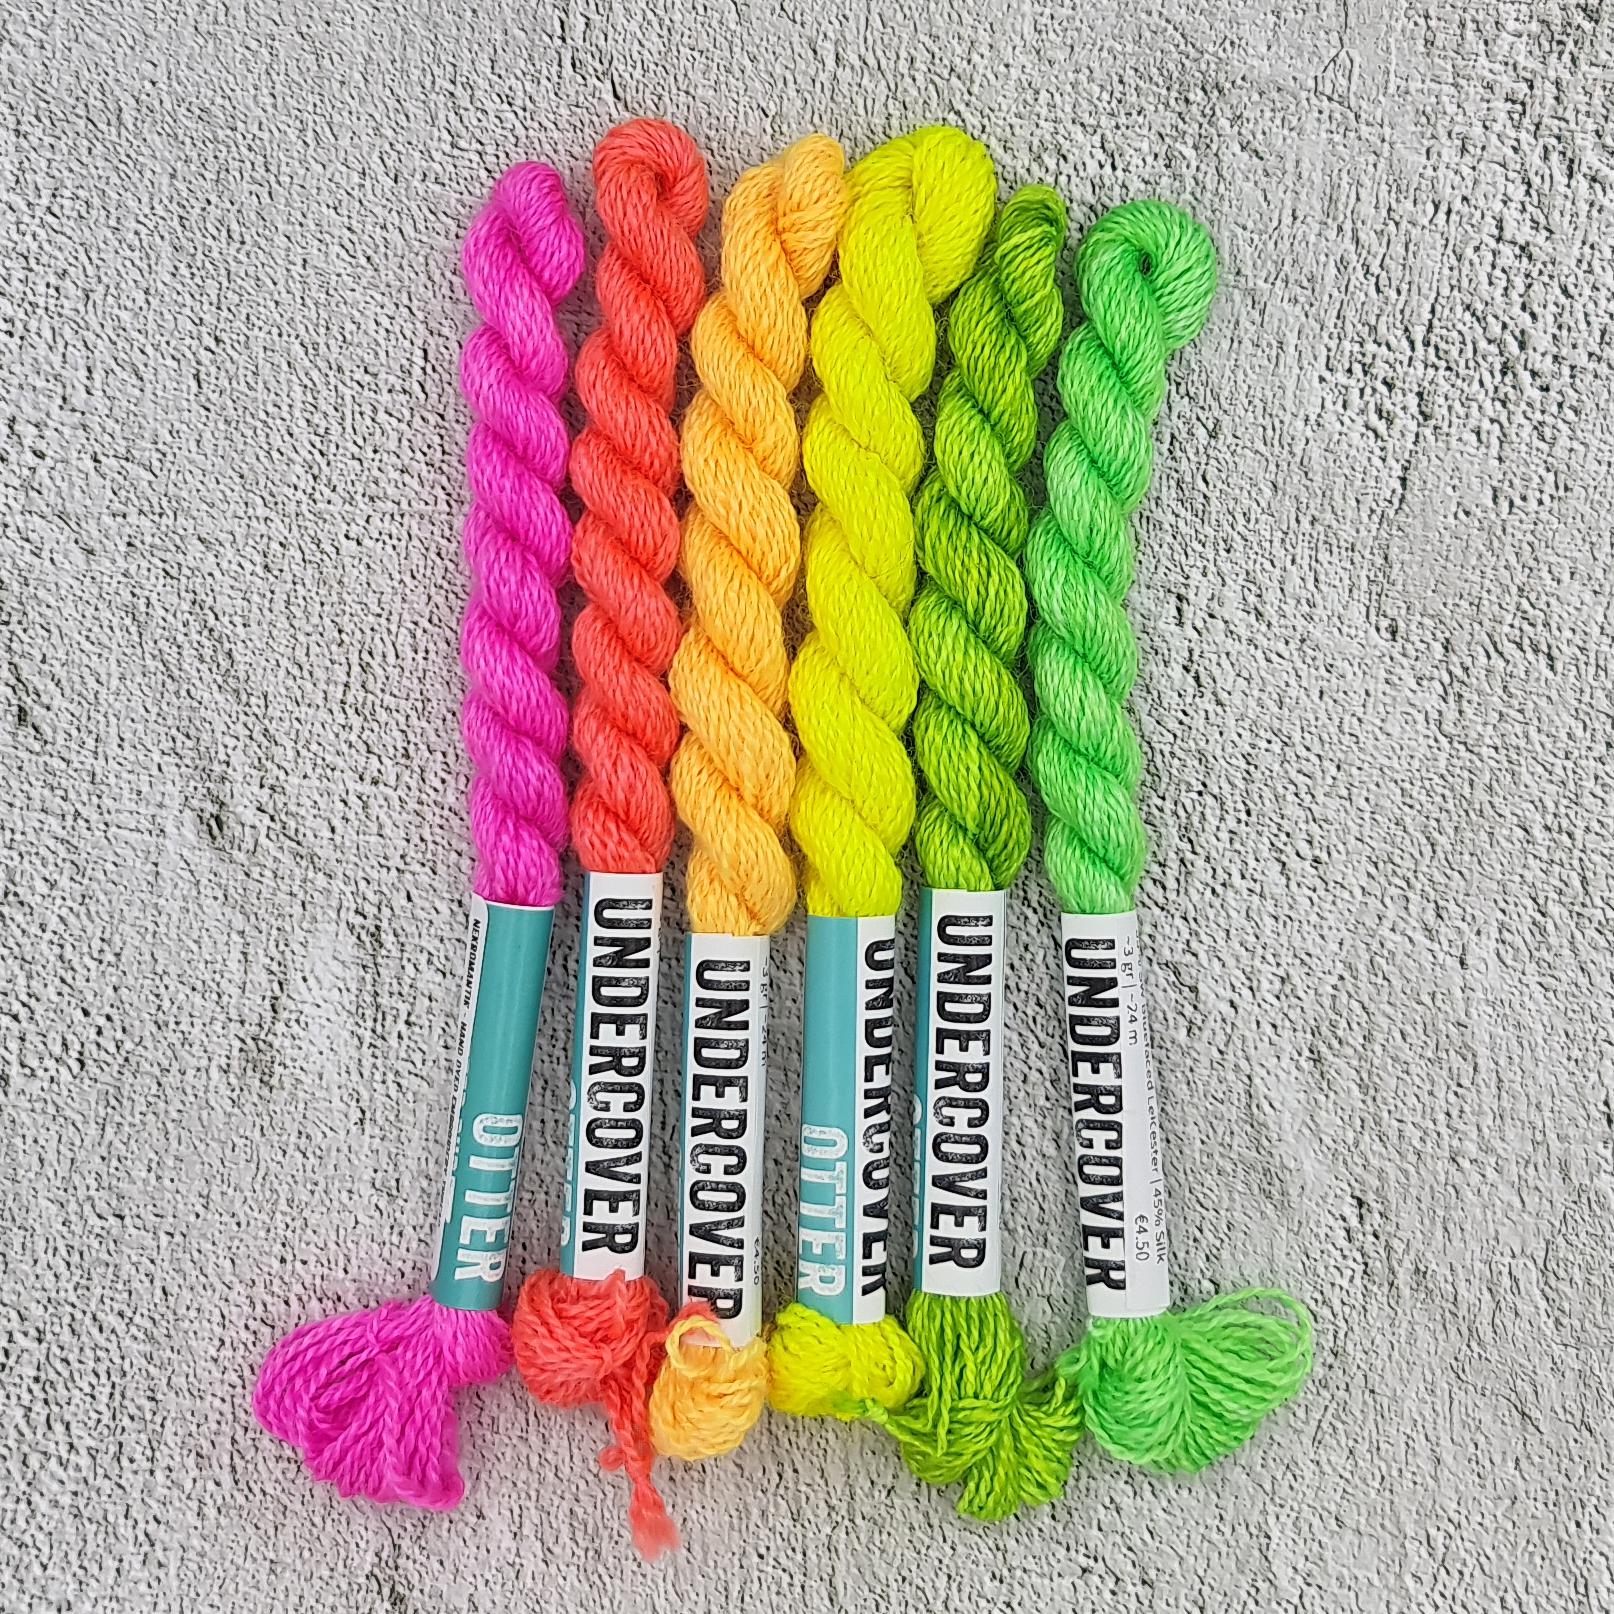 Summer Slays - Hand Dyed Embroidery Thread Set - Undercover Otter